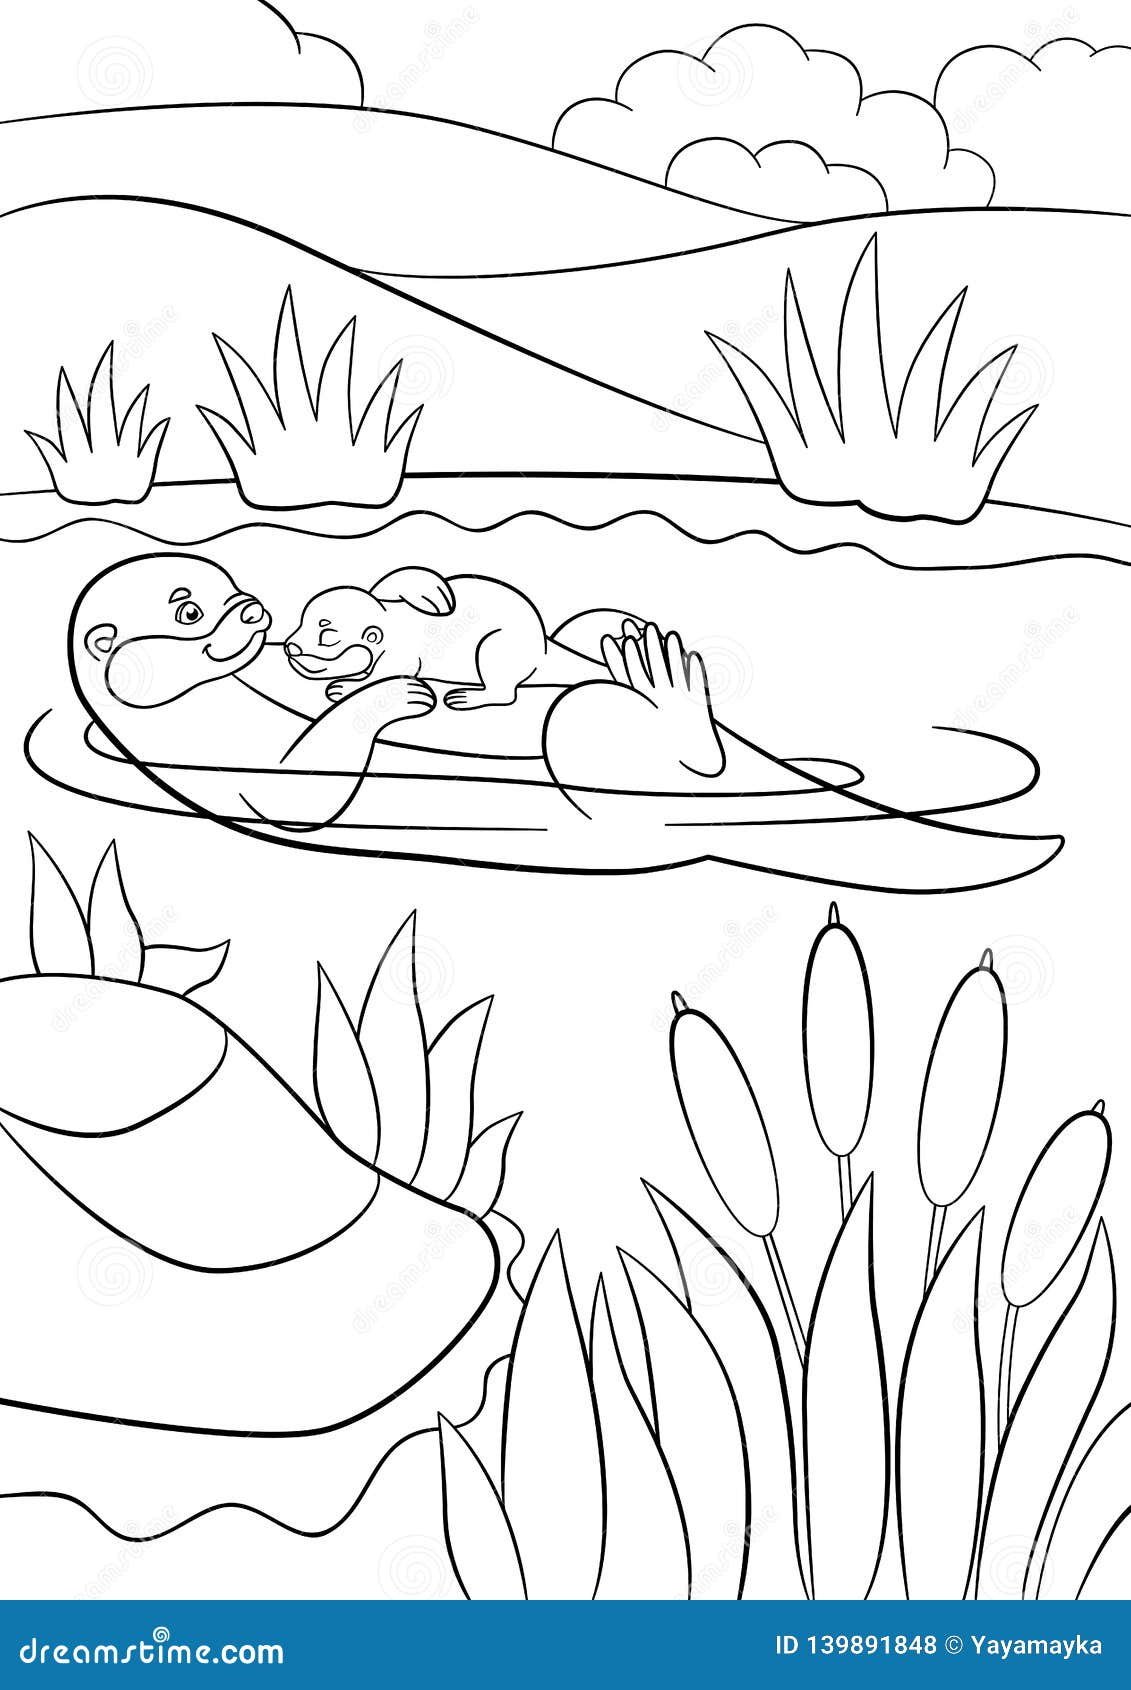 Coloring Pages Mother Otter Swims With Her Little Cute Baby In The River Stock Vector Illustration Of Little Landscape 139891848